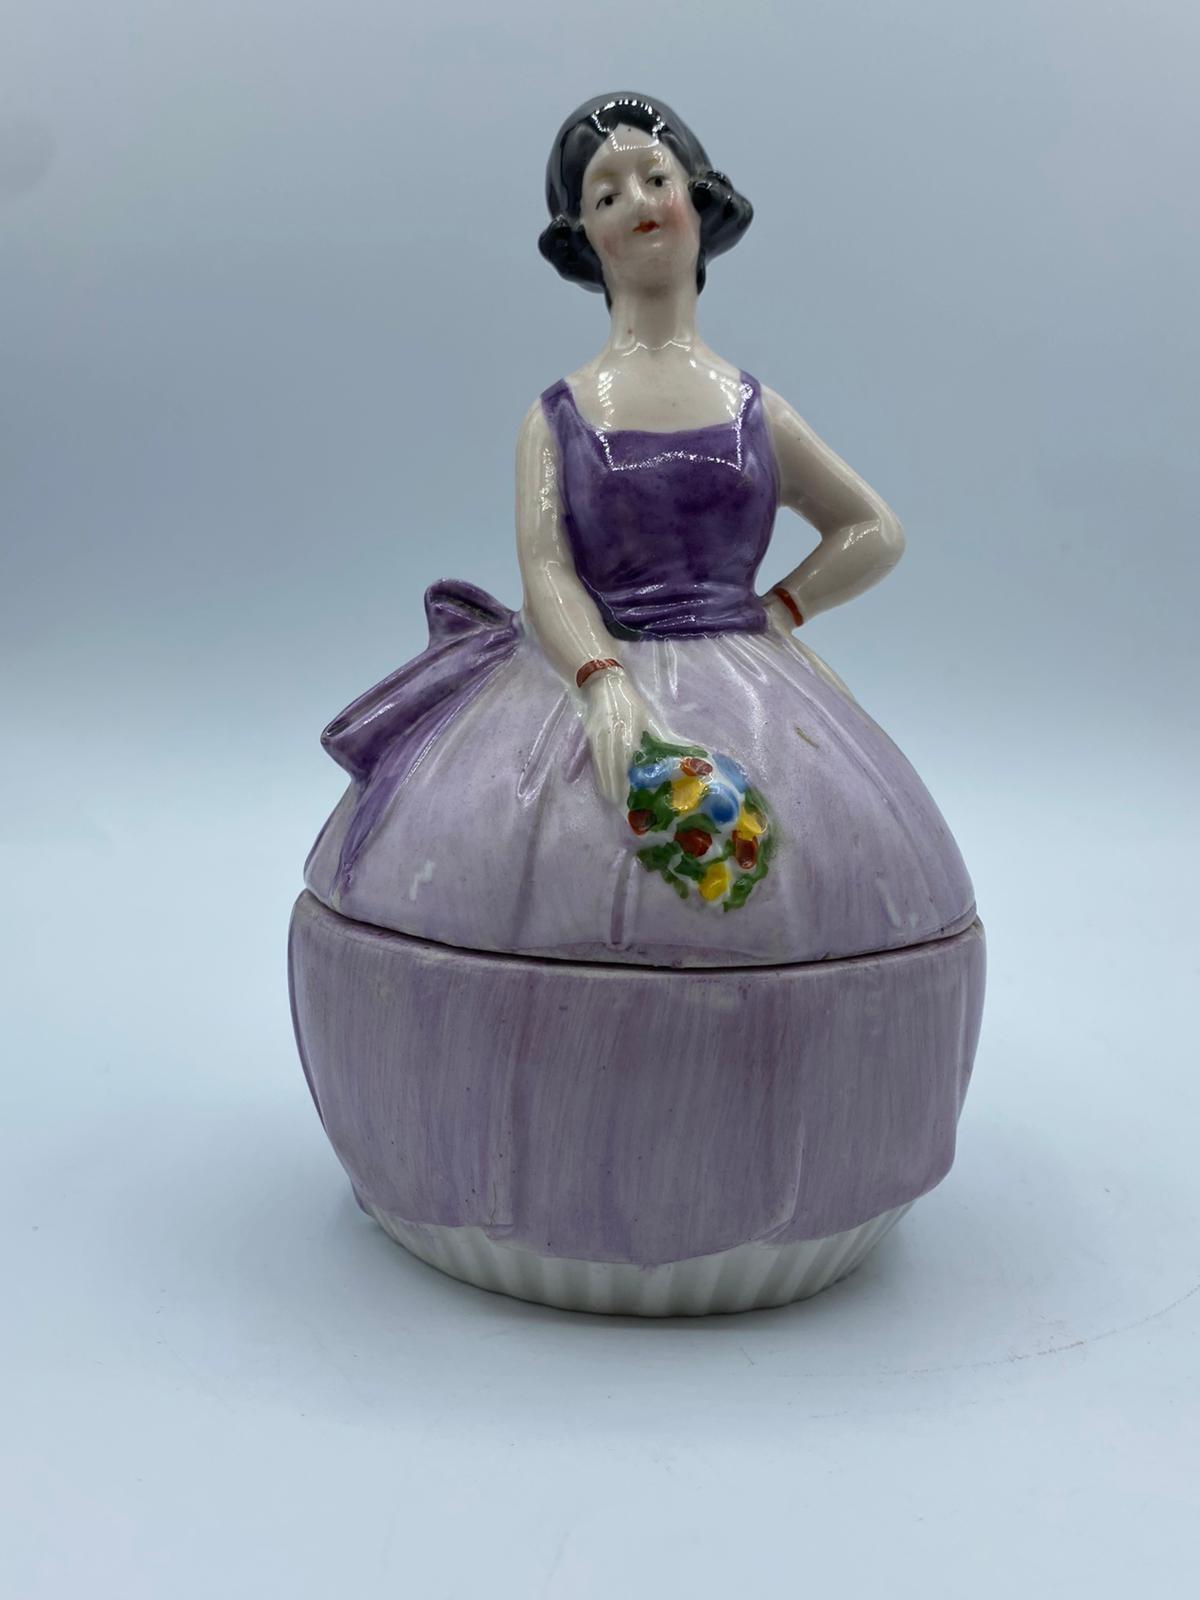 Vintage pair of Ceramic powder boxes in the form of ladies in orange and purple ballgown dresses - Image 14 of 20